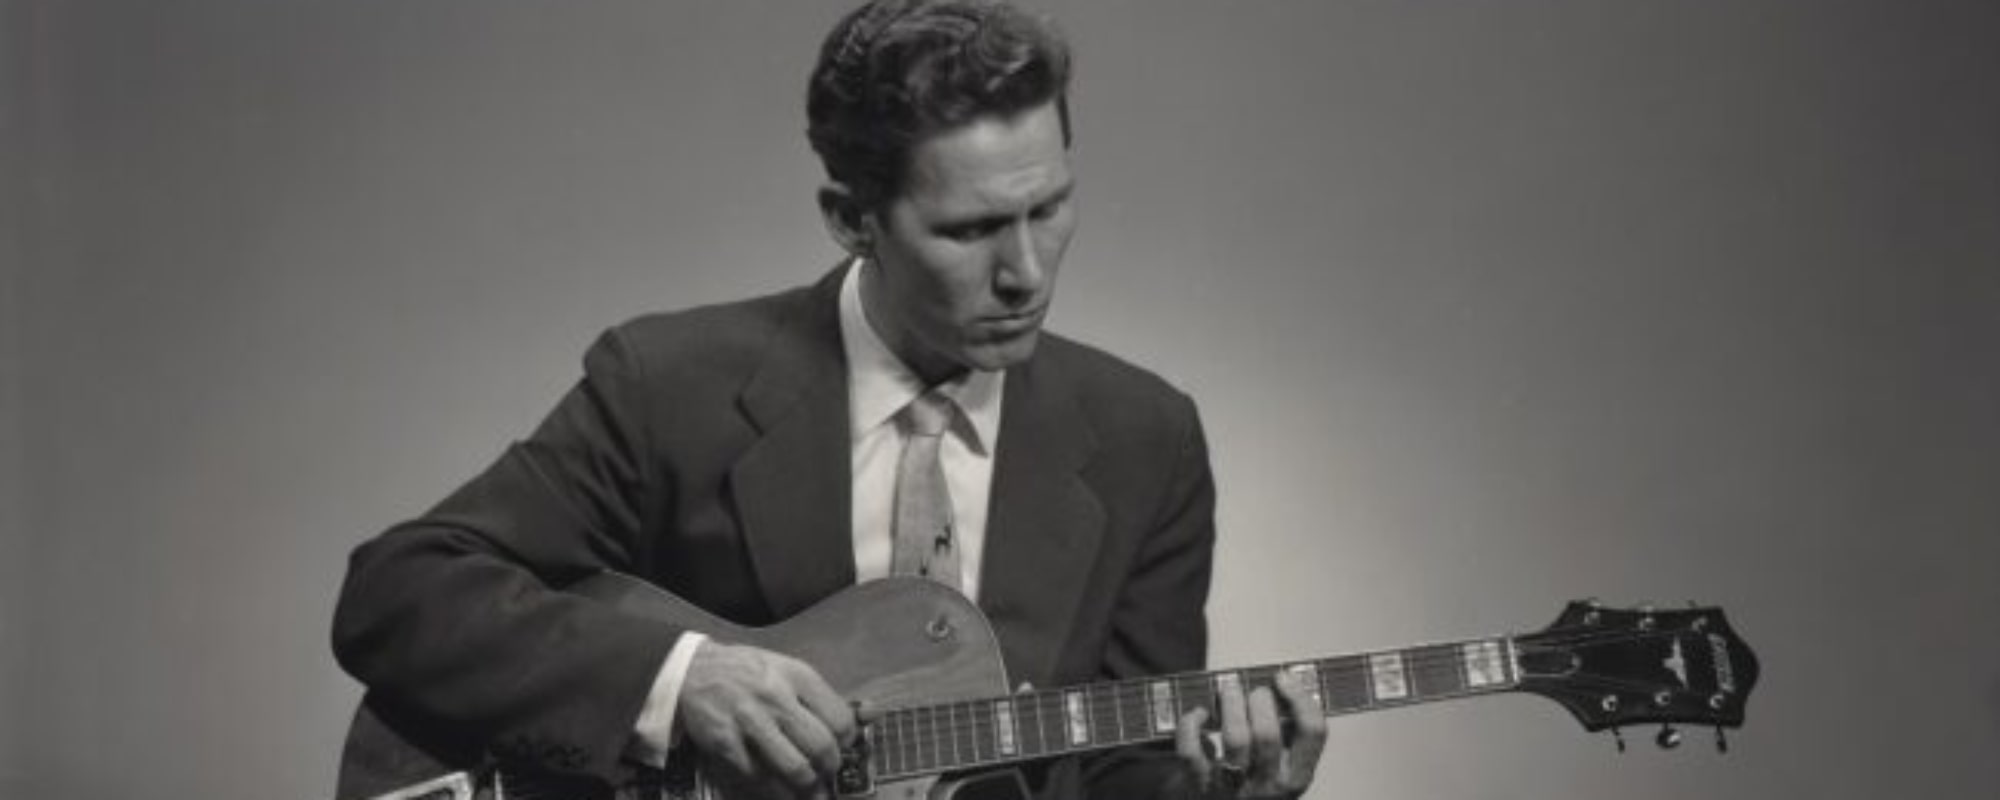 New Chet Atkins Tribute Album Will Feature Vince Gill, Tommy Emmanuel, Eric Clapton, & More